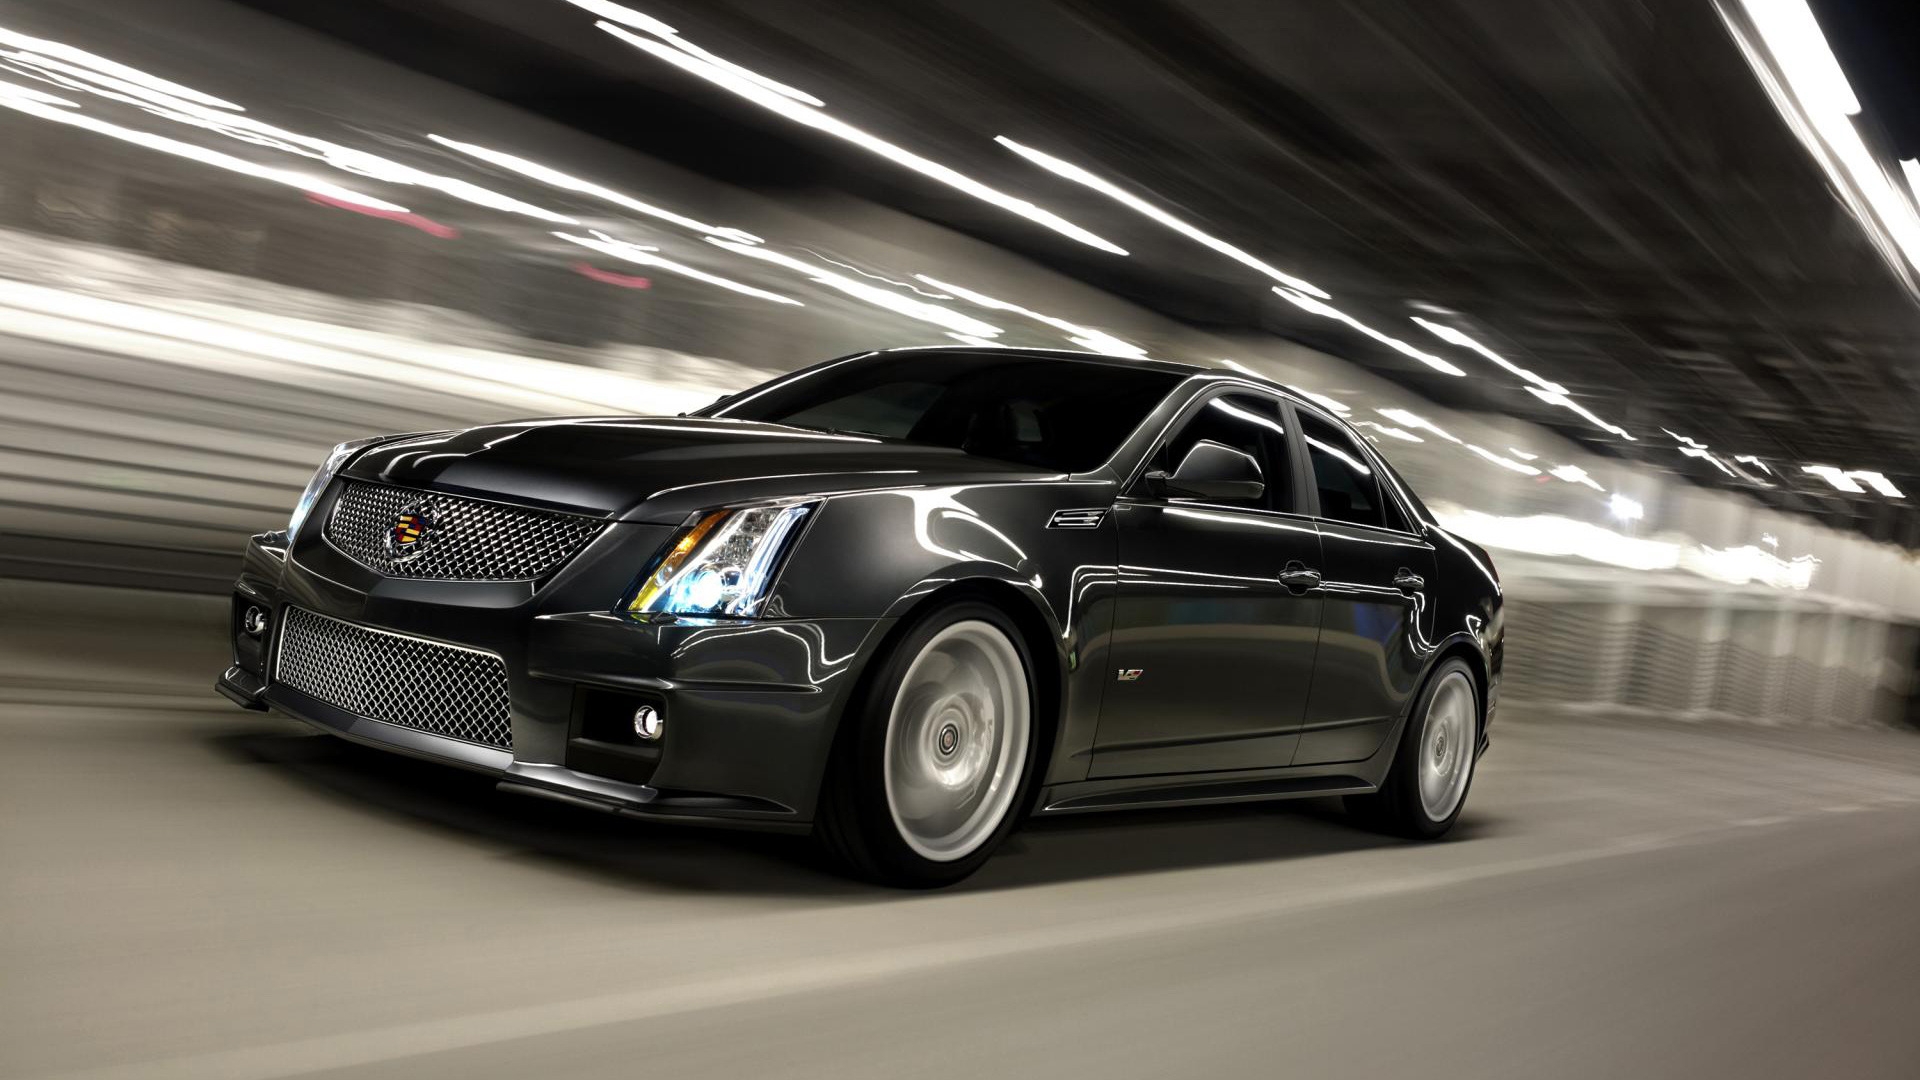 Cadillac CTS 2013 for 1920 x 1080 HDTV 1080p resolution